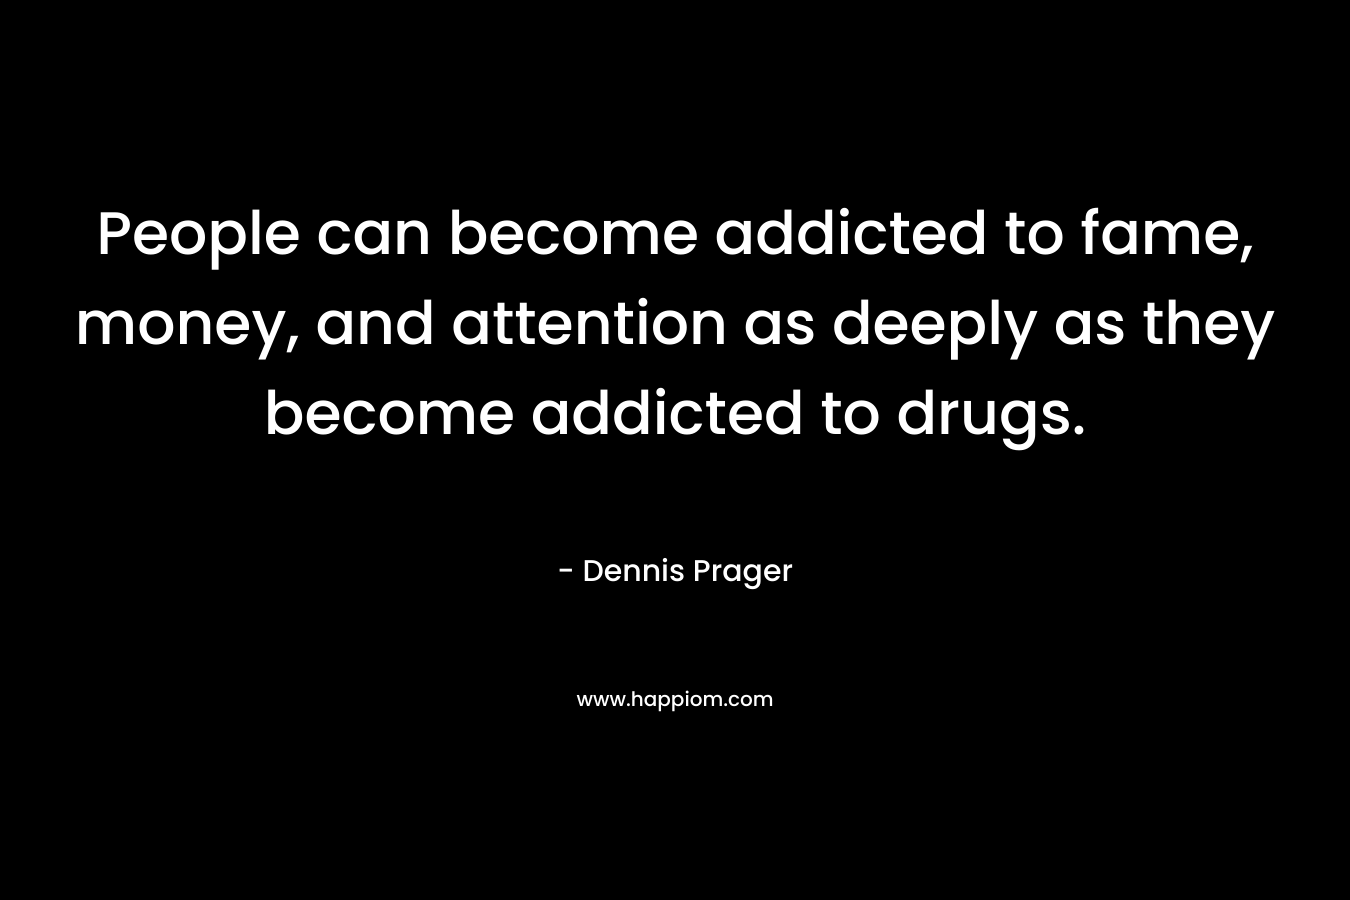 People can become addicted to fame, money, and attention as deeply as they become addicted to drugs. – Dennis Prager